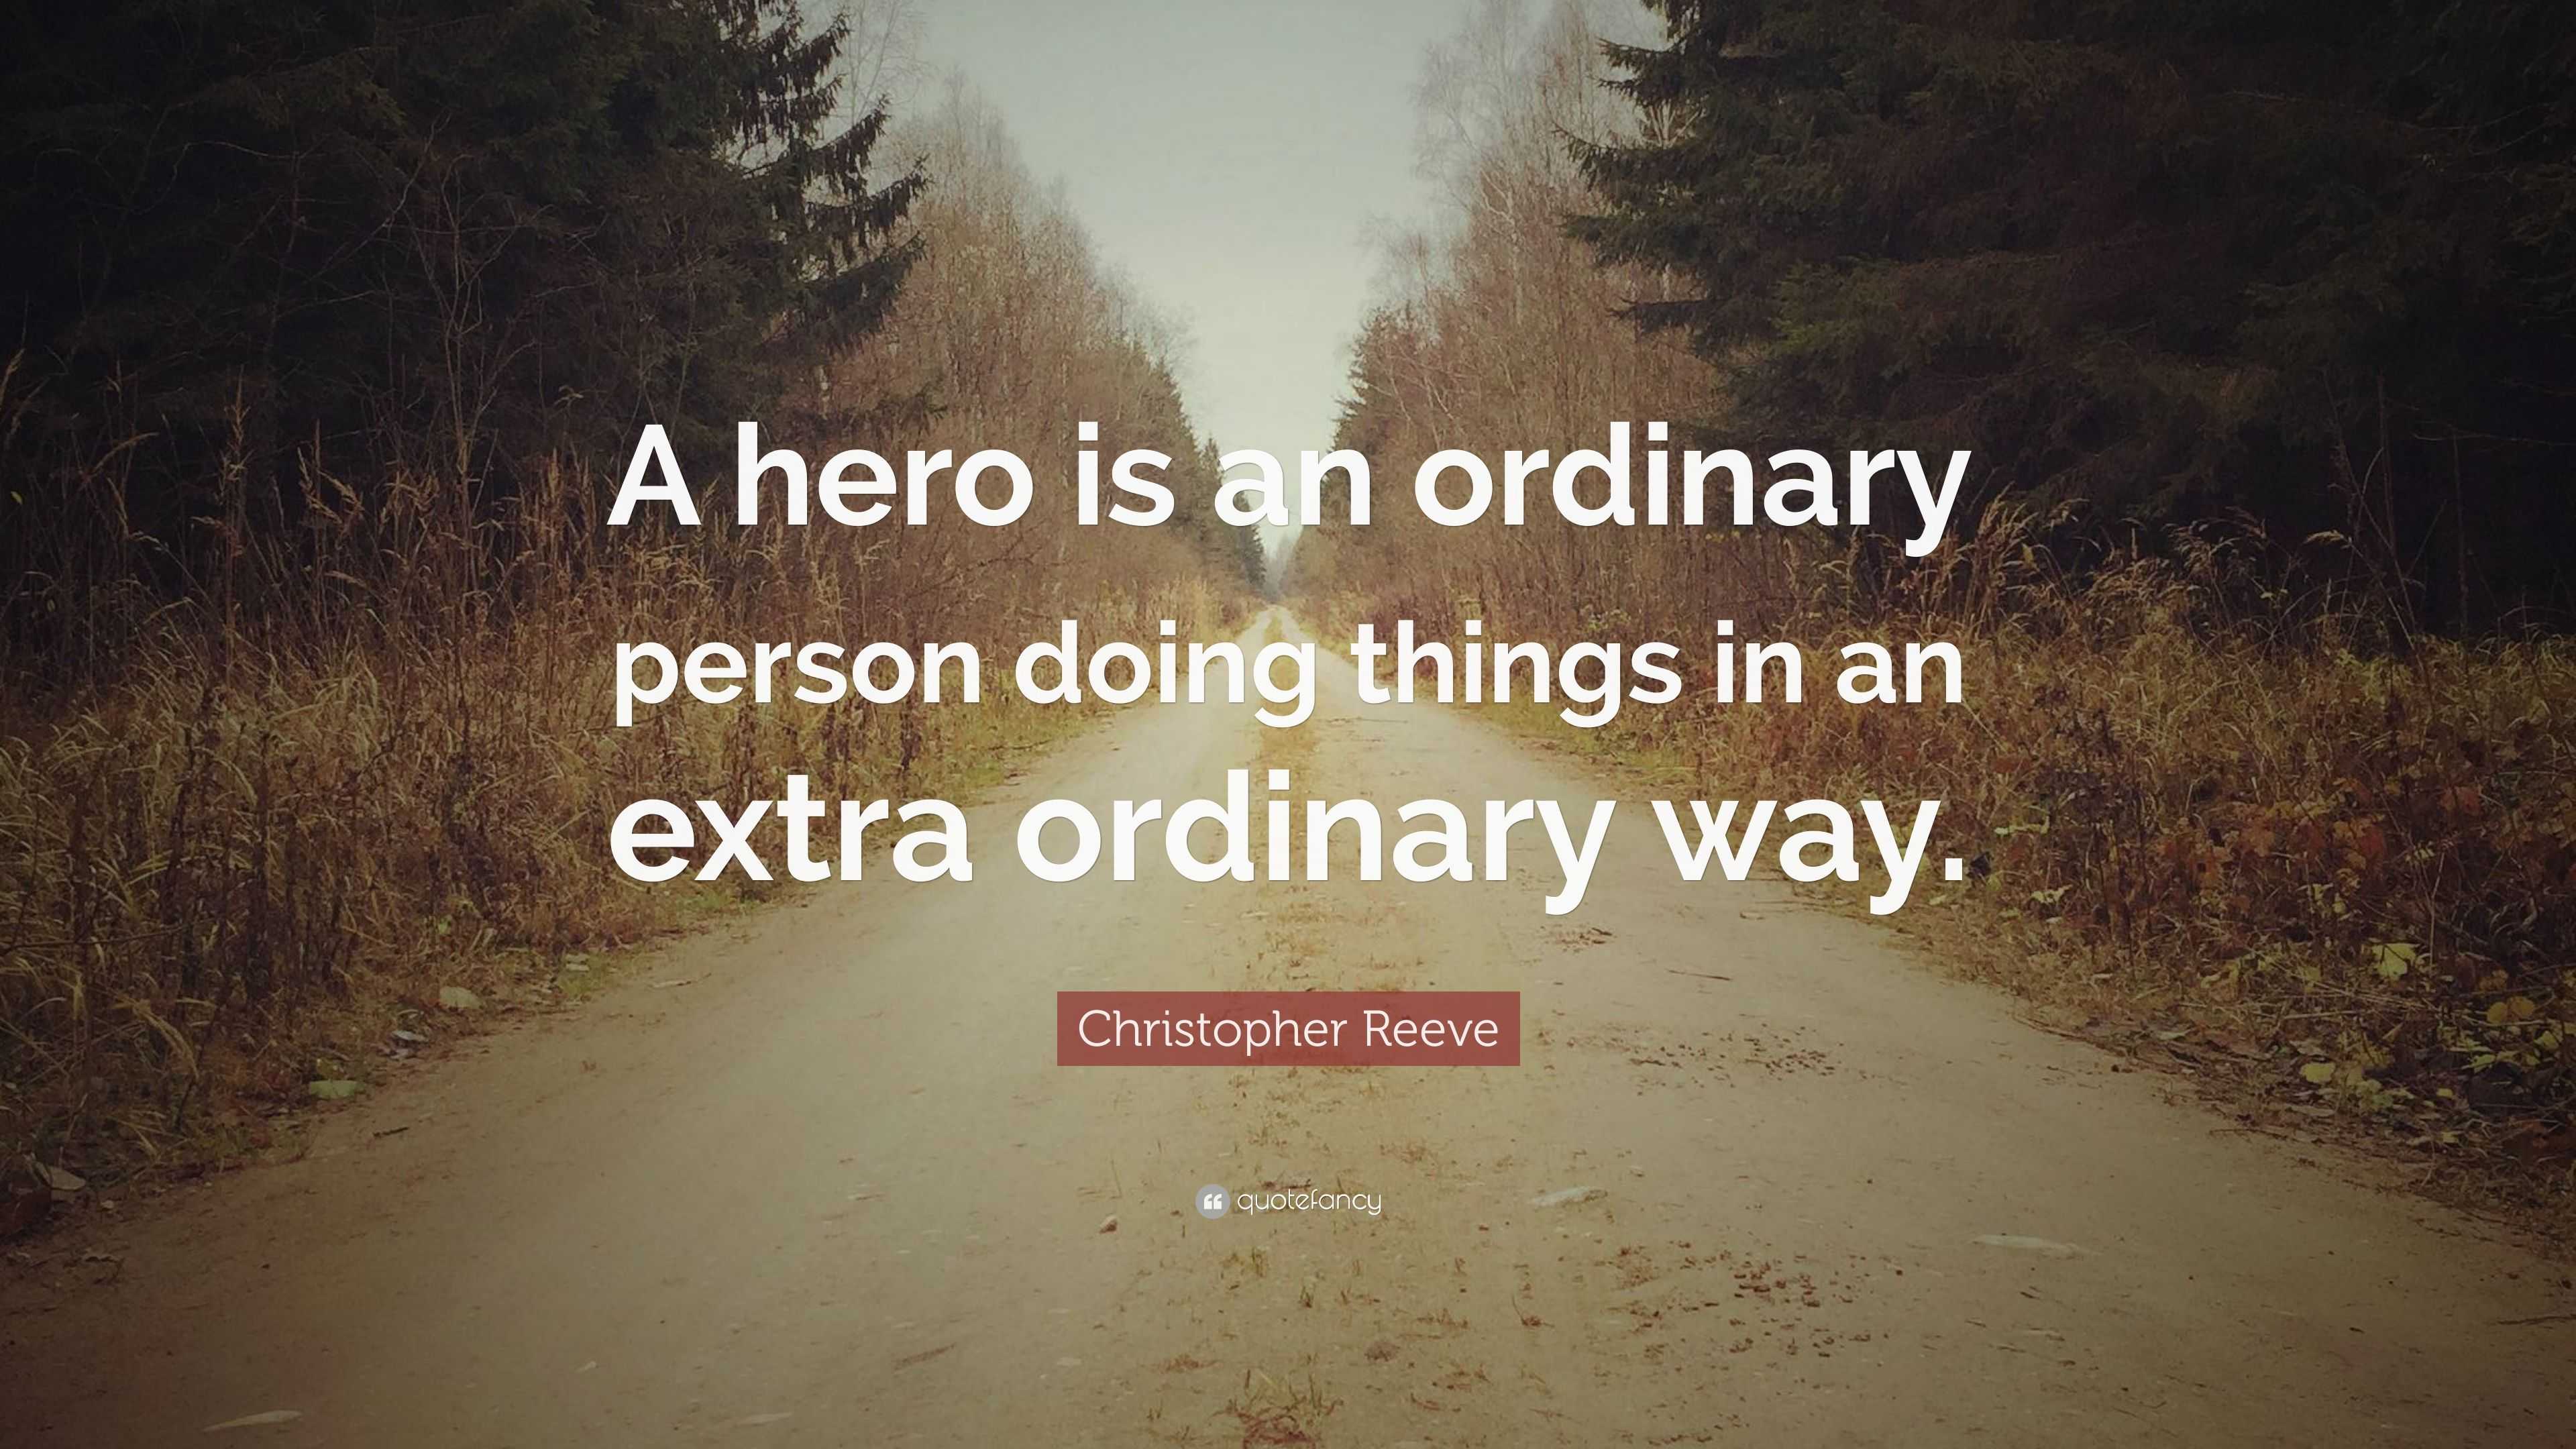 Christopher Reeve Quote: “A hero is an ordinary person doing things in ...